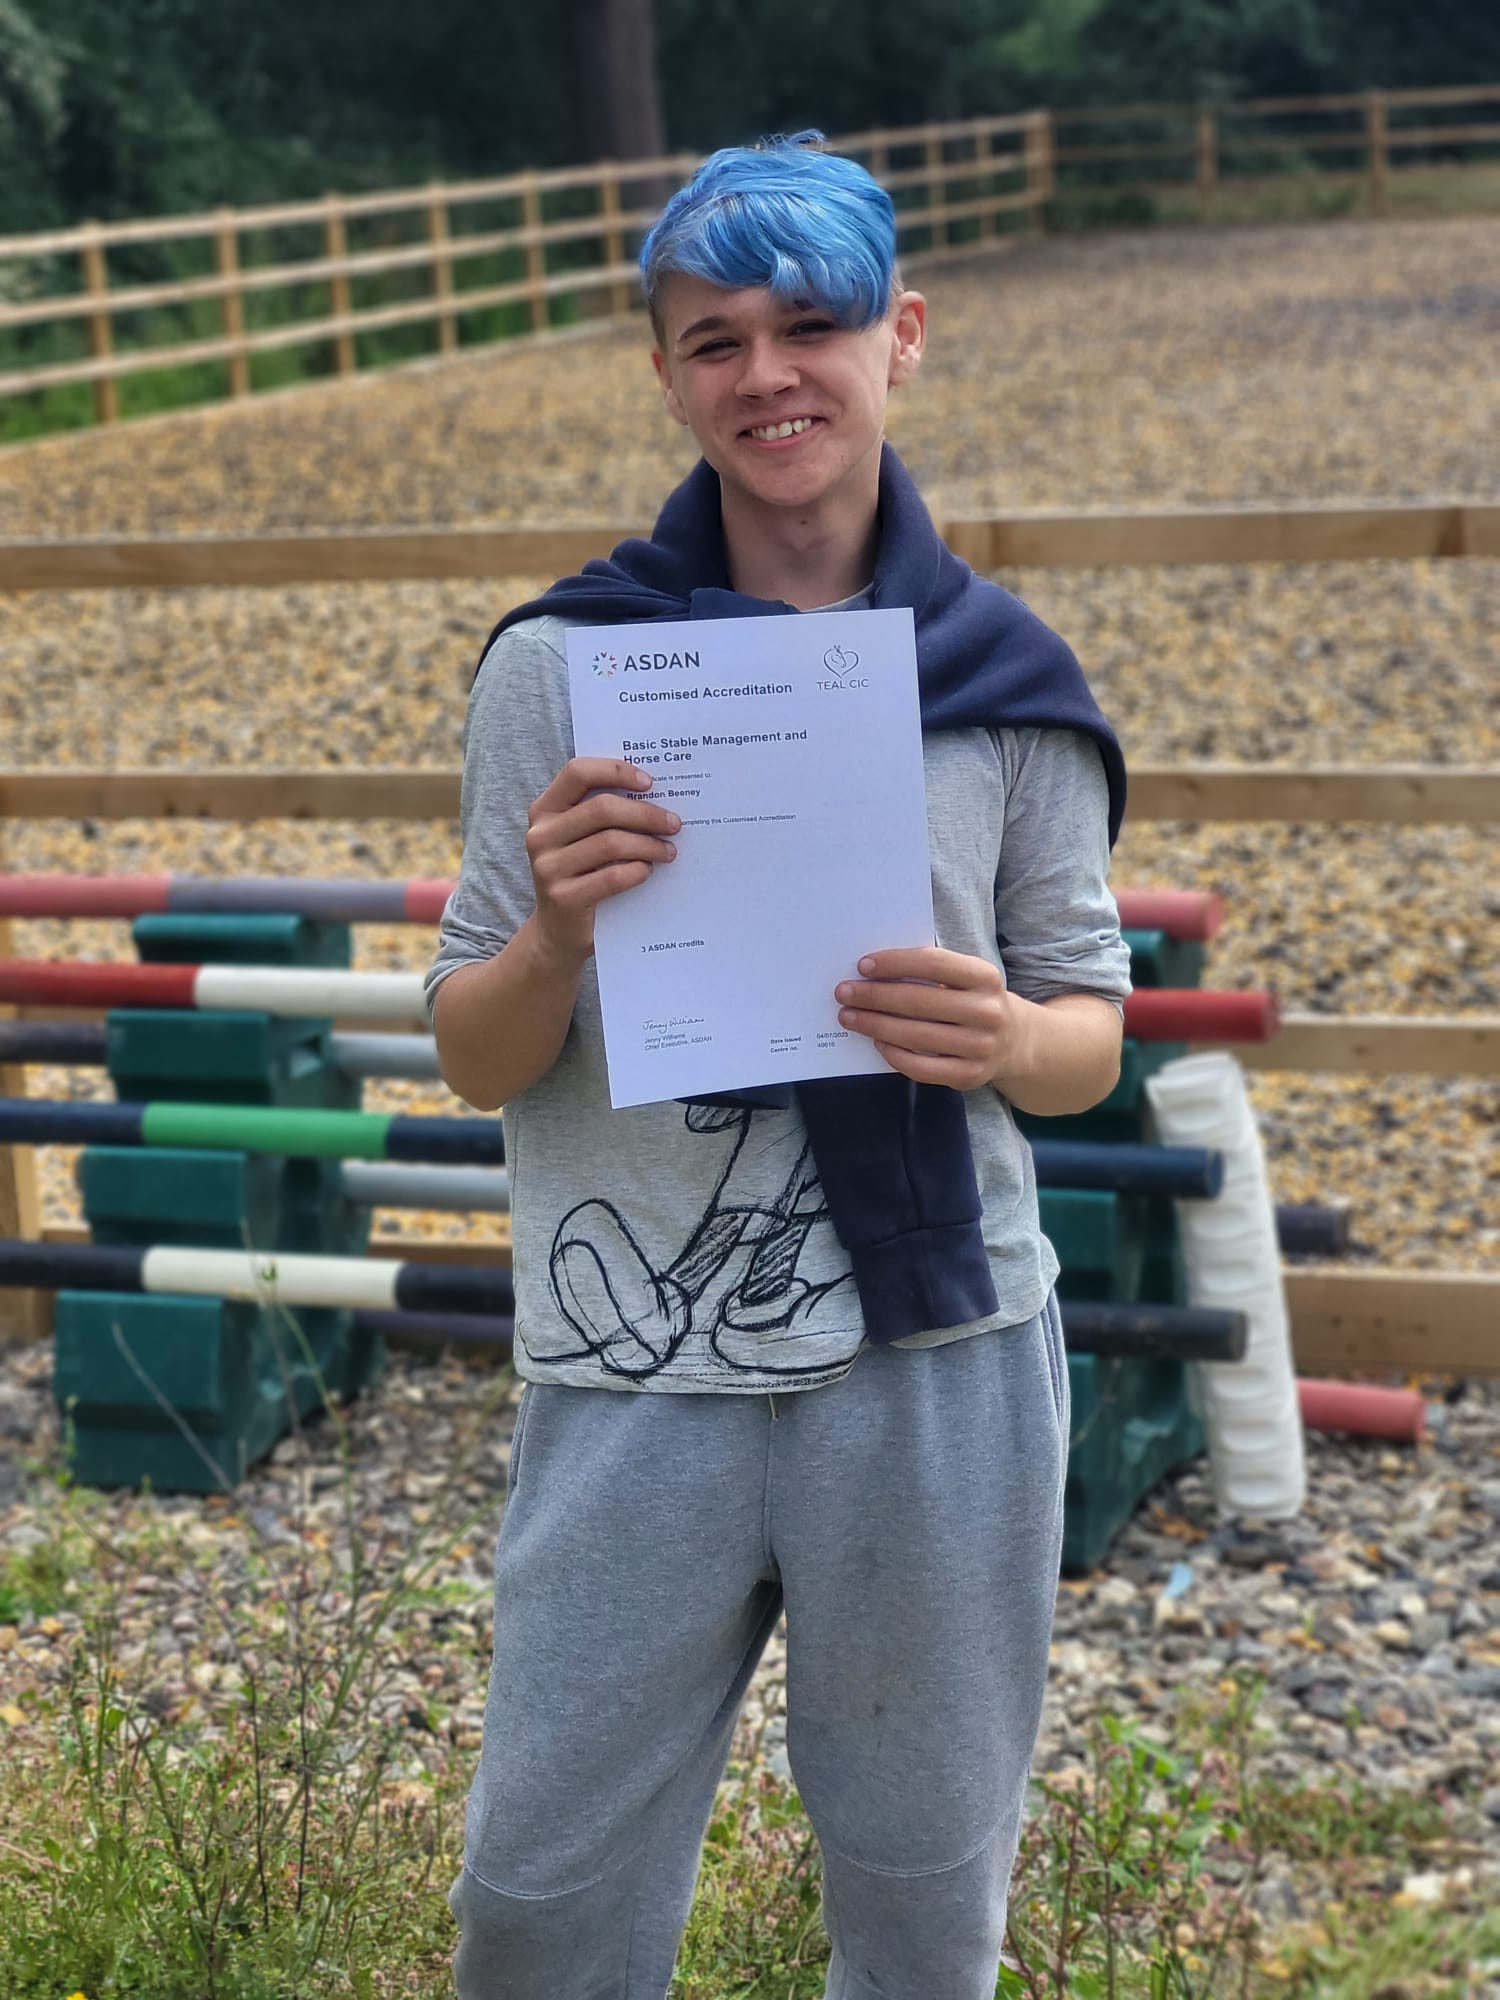 Young person with blue hair outside a stable holding up their ASDAN certificate and smiling